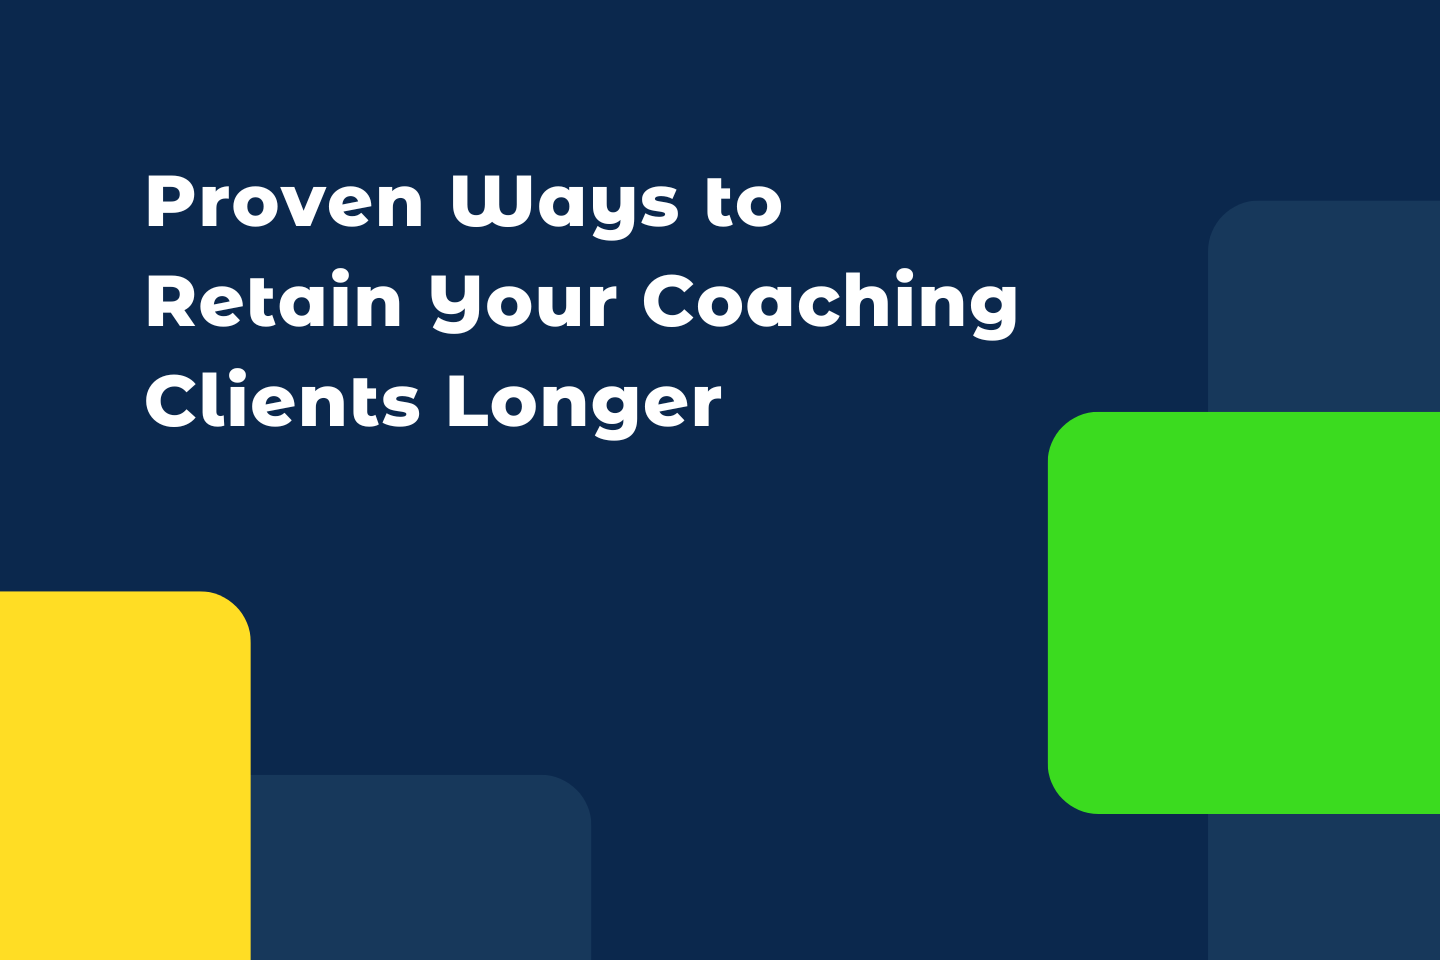 Proven Ways to Retain Your Coaching Clients